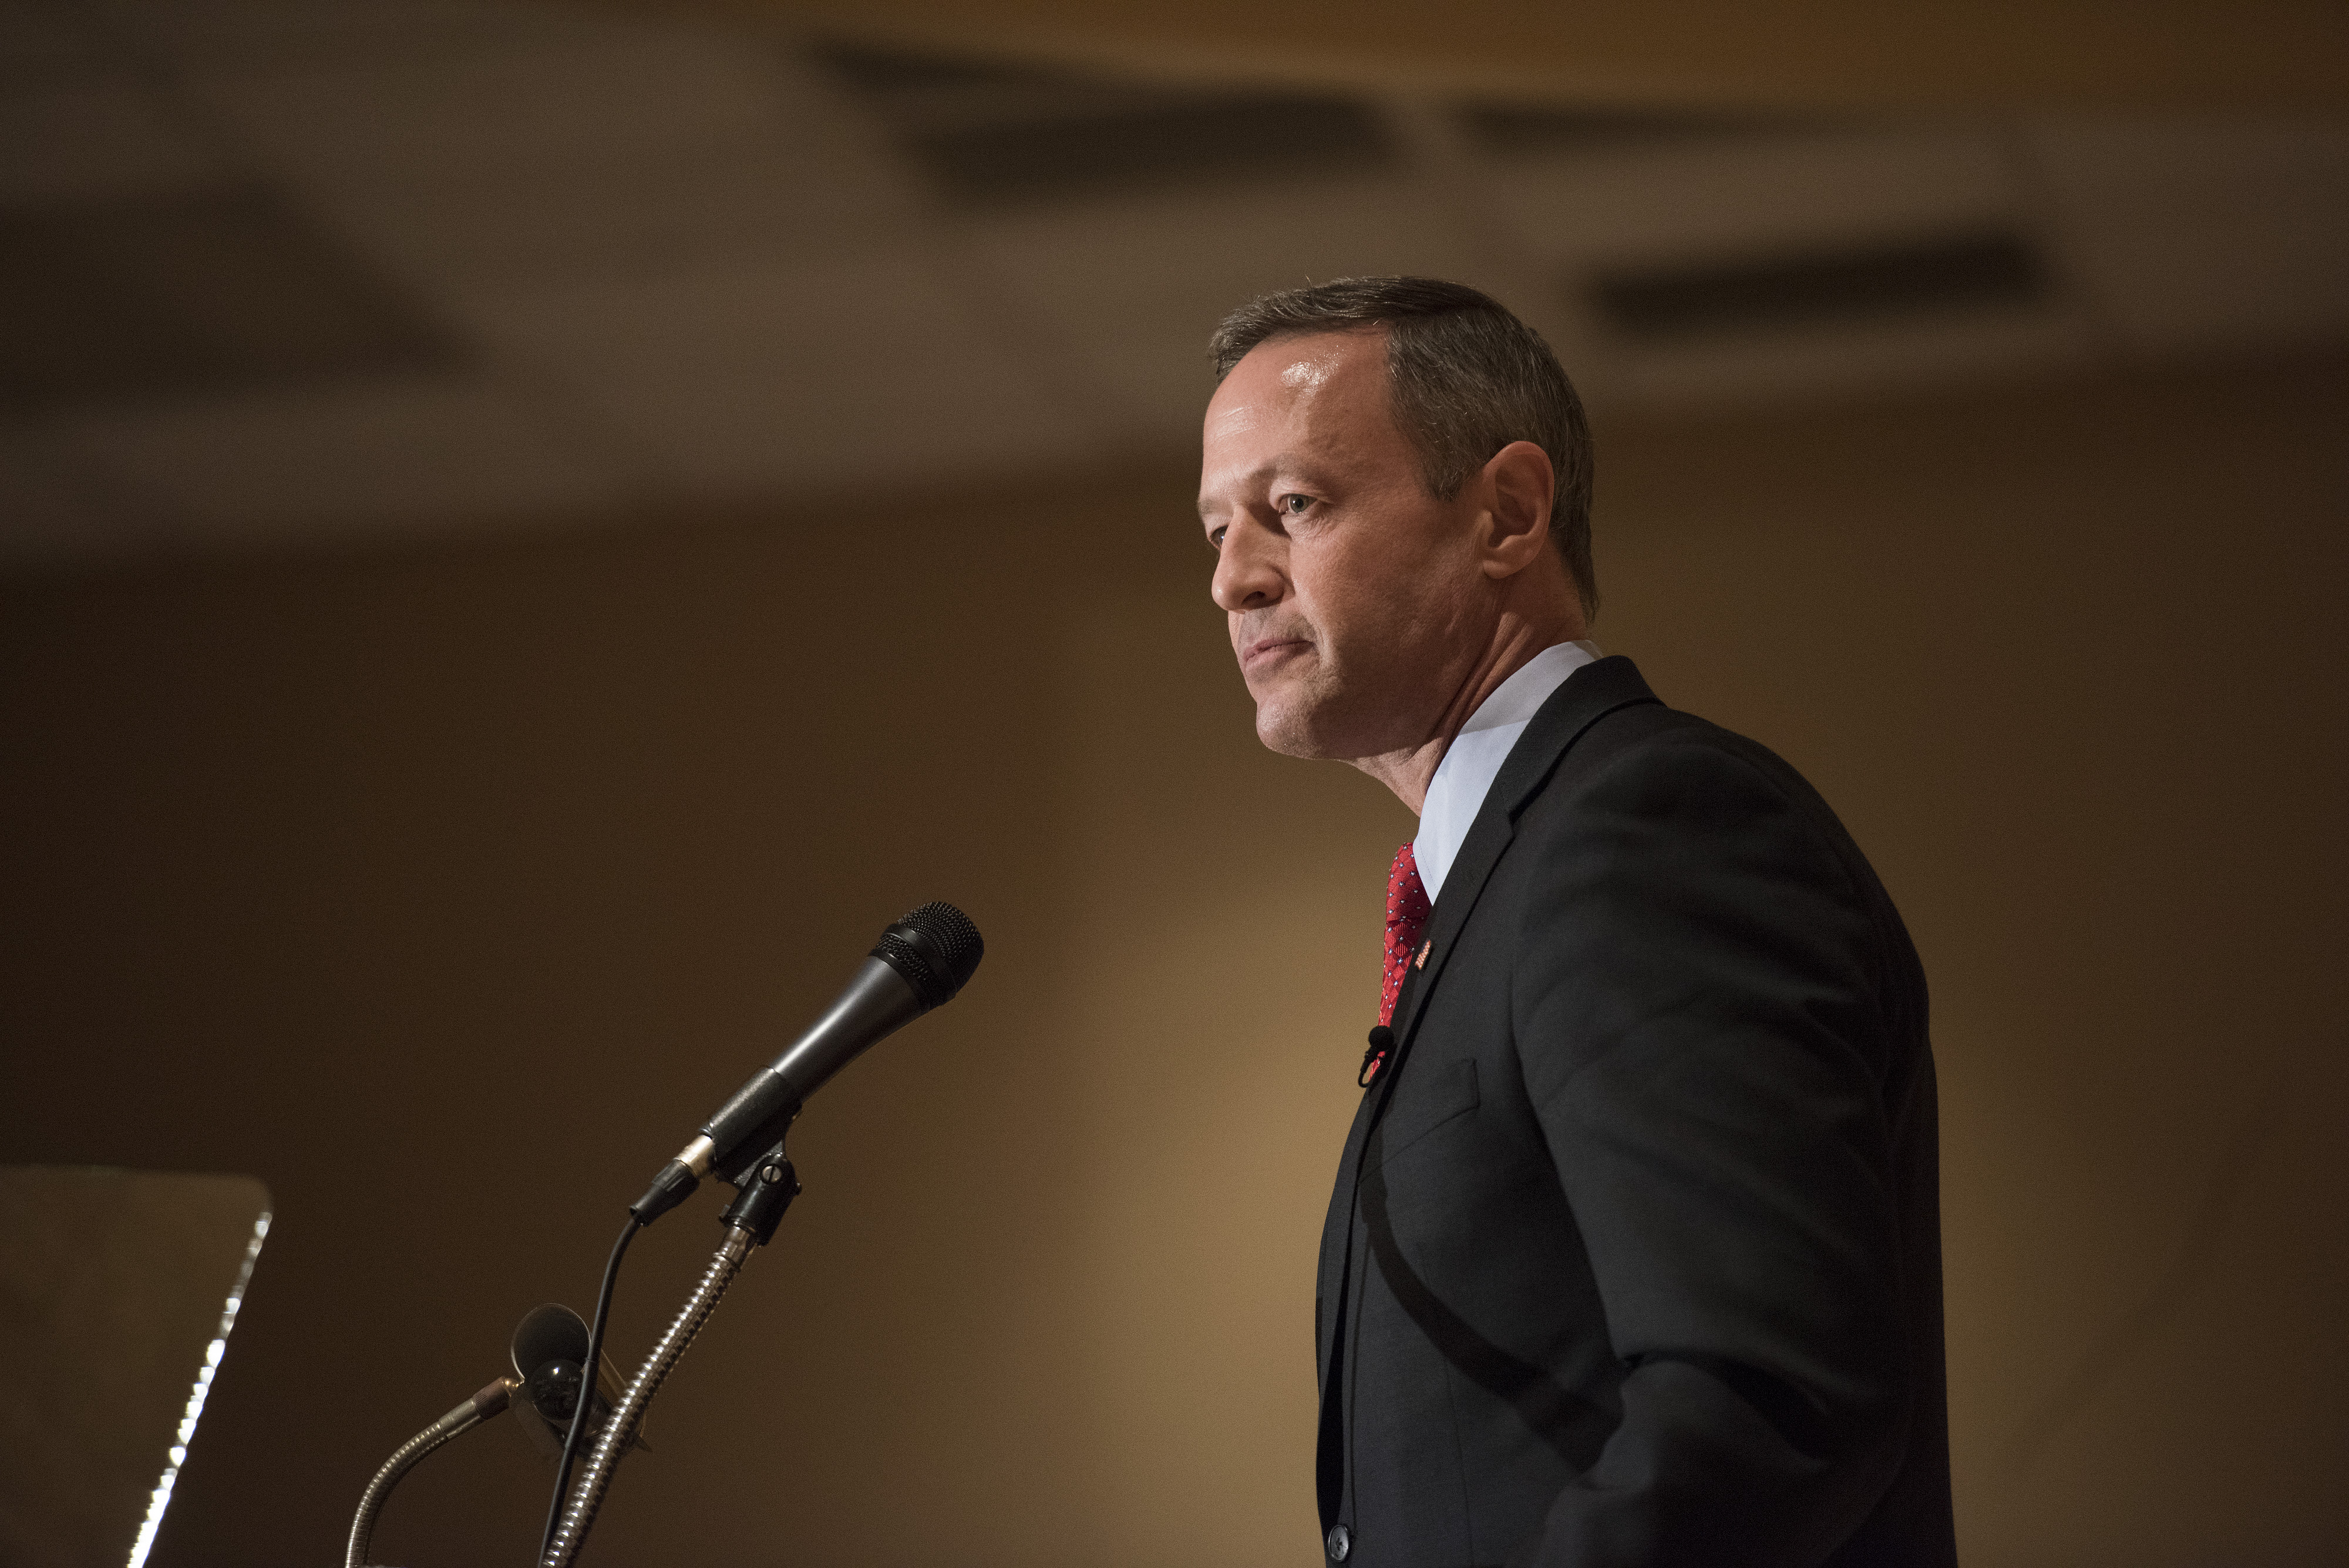 Martin O'Malley, former governor of Maryland and potential Democratic presidential candidate, during the Scott County Democratic Party dinner in Davenport, Iowa, U.S., on Friday, March 20, 2015. (Bloomberg&amp;mdash;Bloomberg via Getty Images)